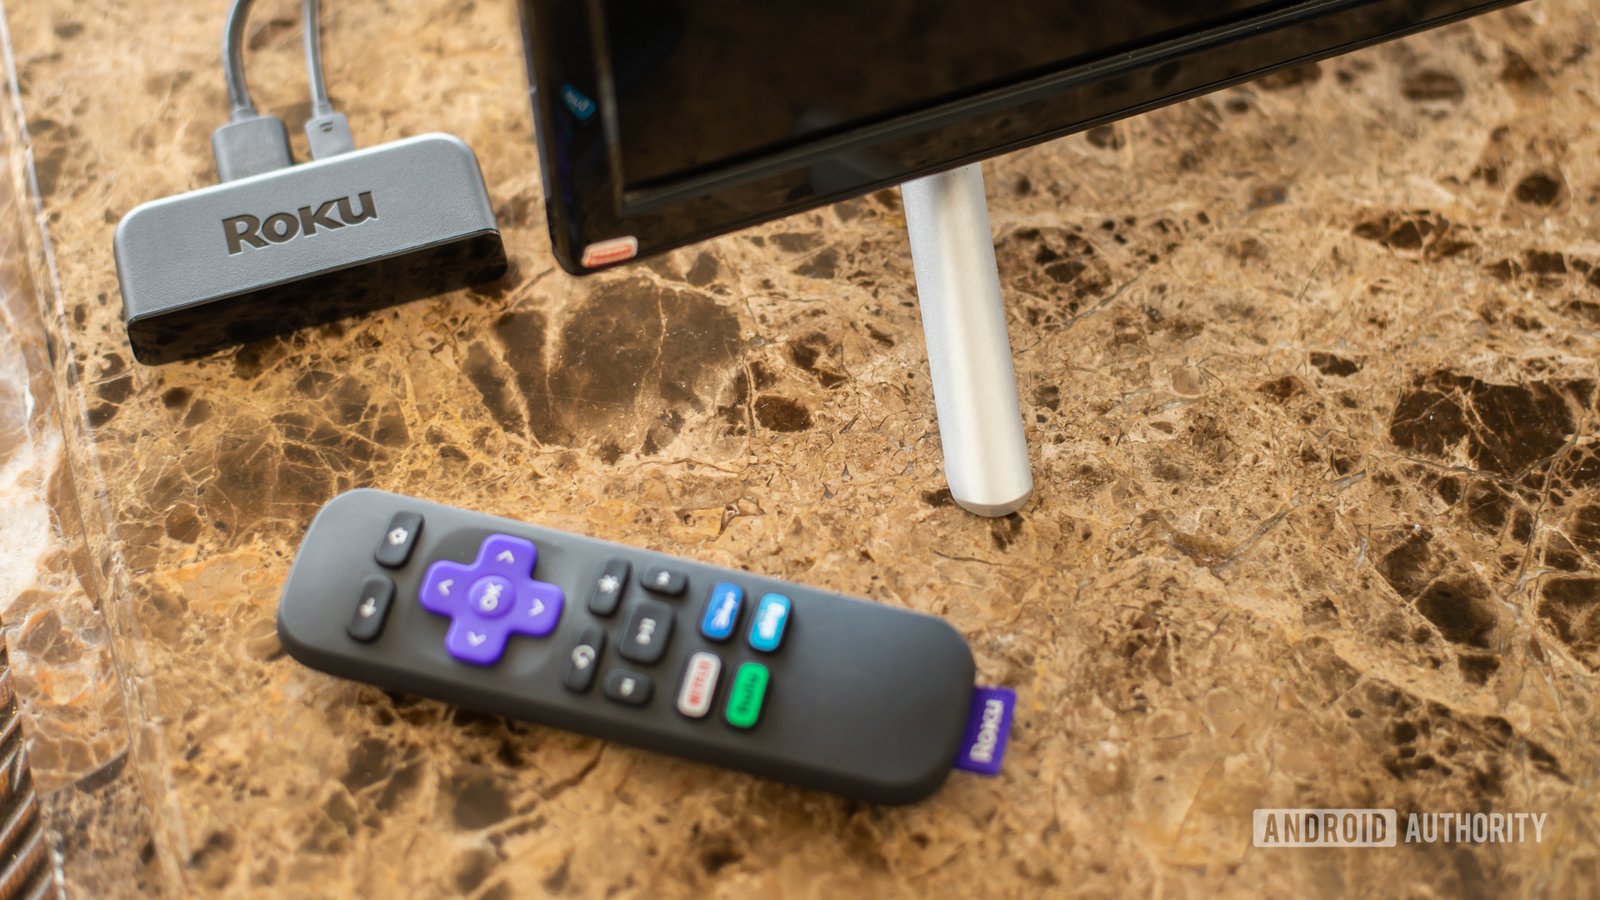 Roku angers users by disabling TVs until they consent to new terms